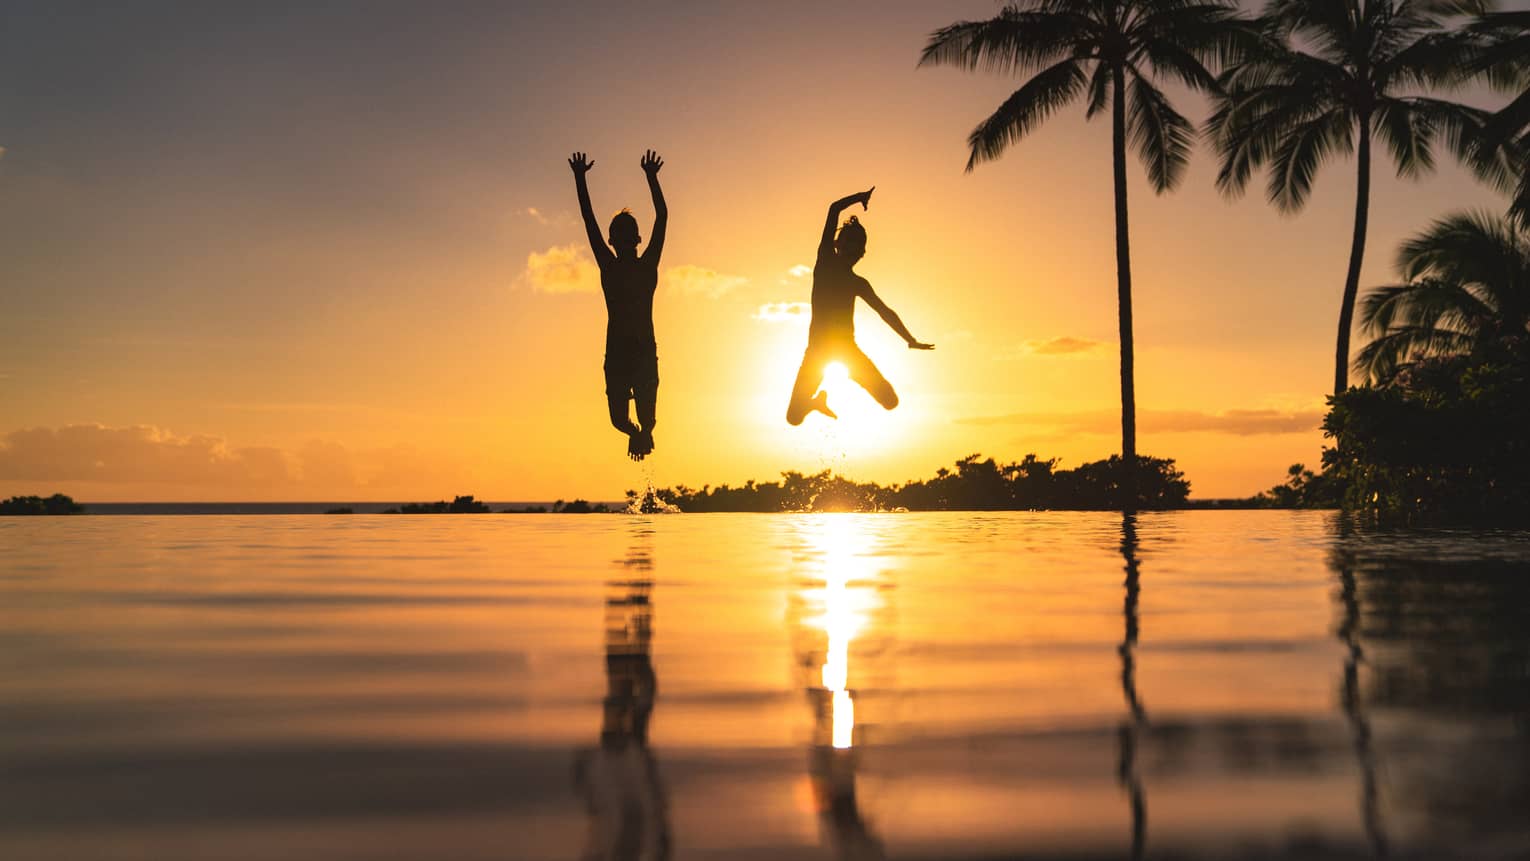 Silhouette of two children jumping above the water, sunset and palm trees in background 